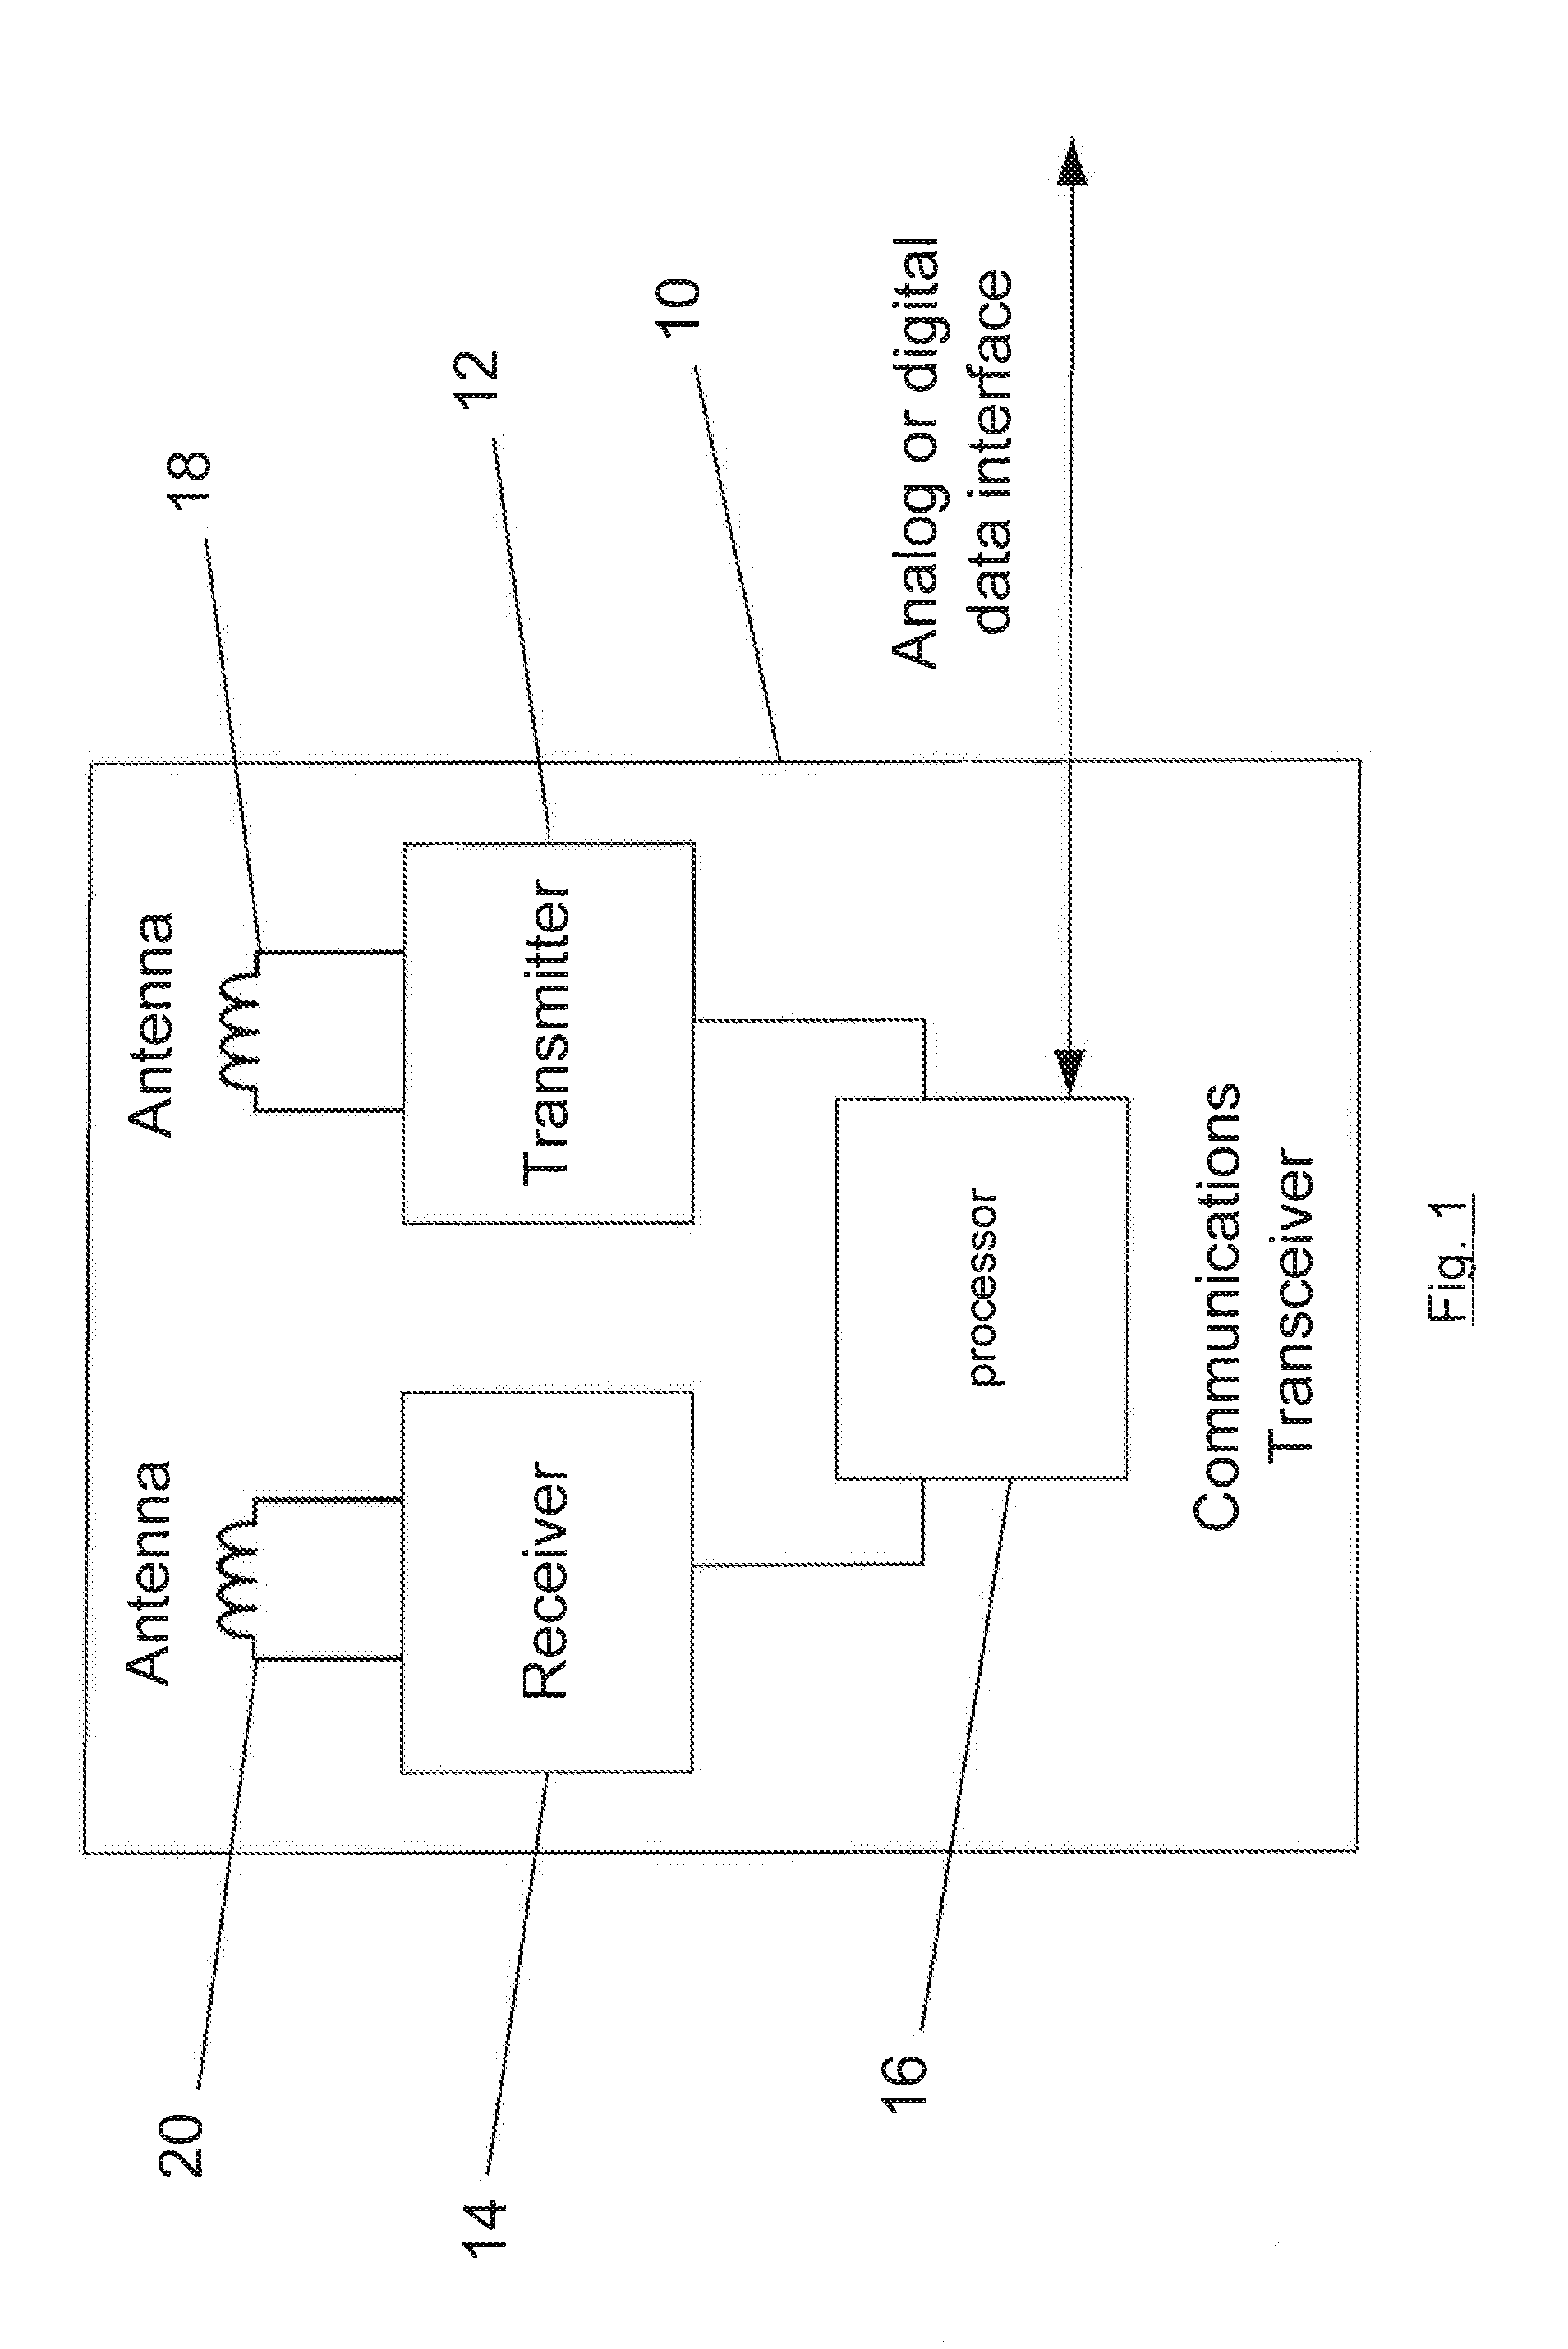 Mobile device with an underwater communications system and method